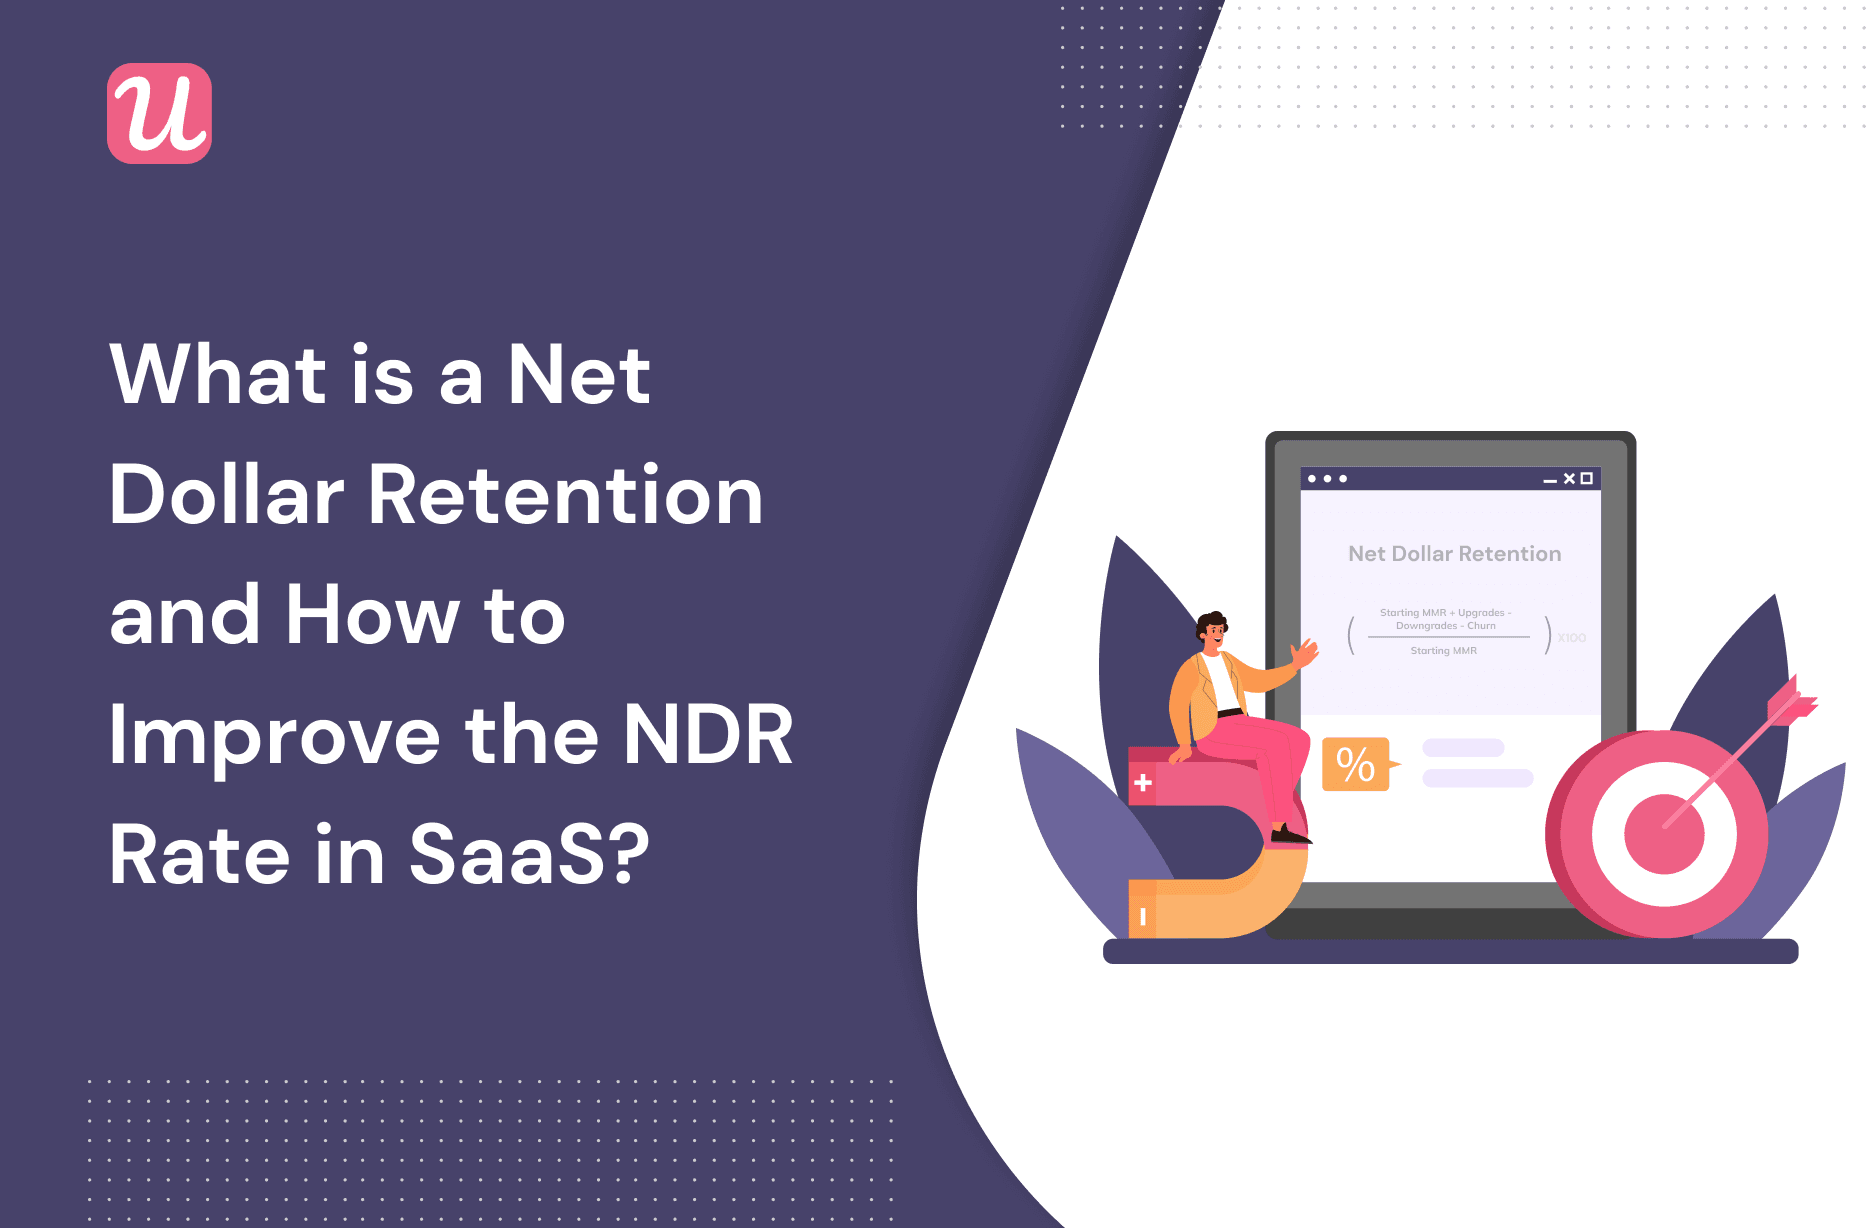 What is Net Dollar Retention And How To Improve Your NDR Rate in SaaS?